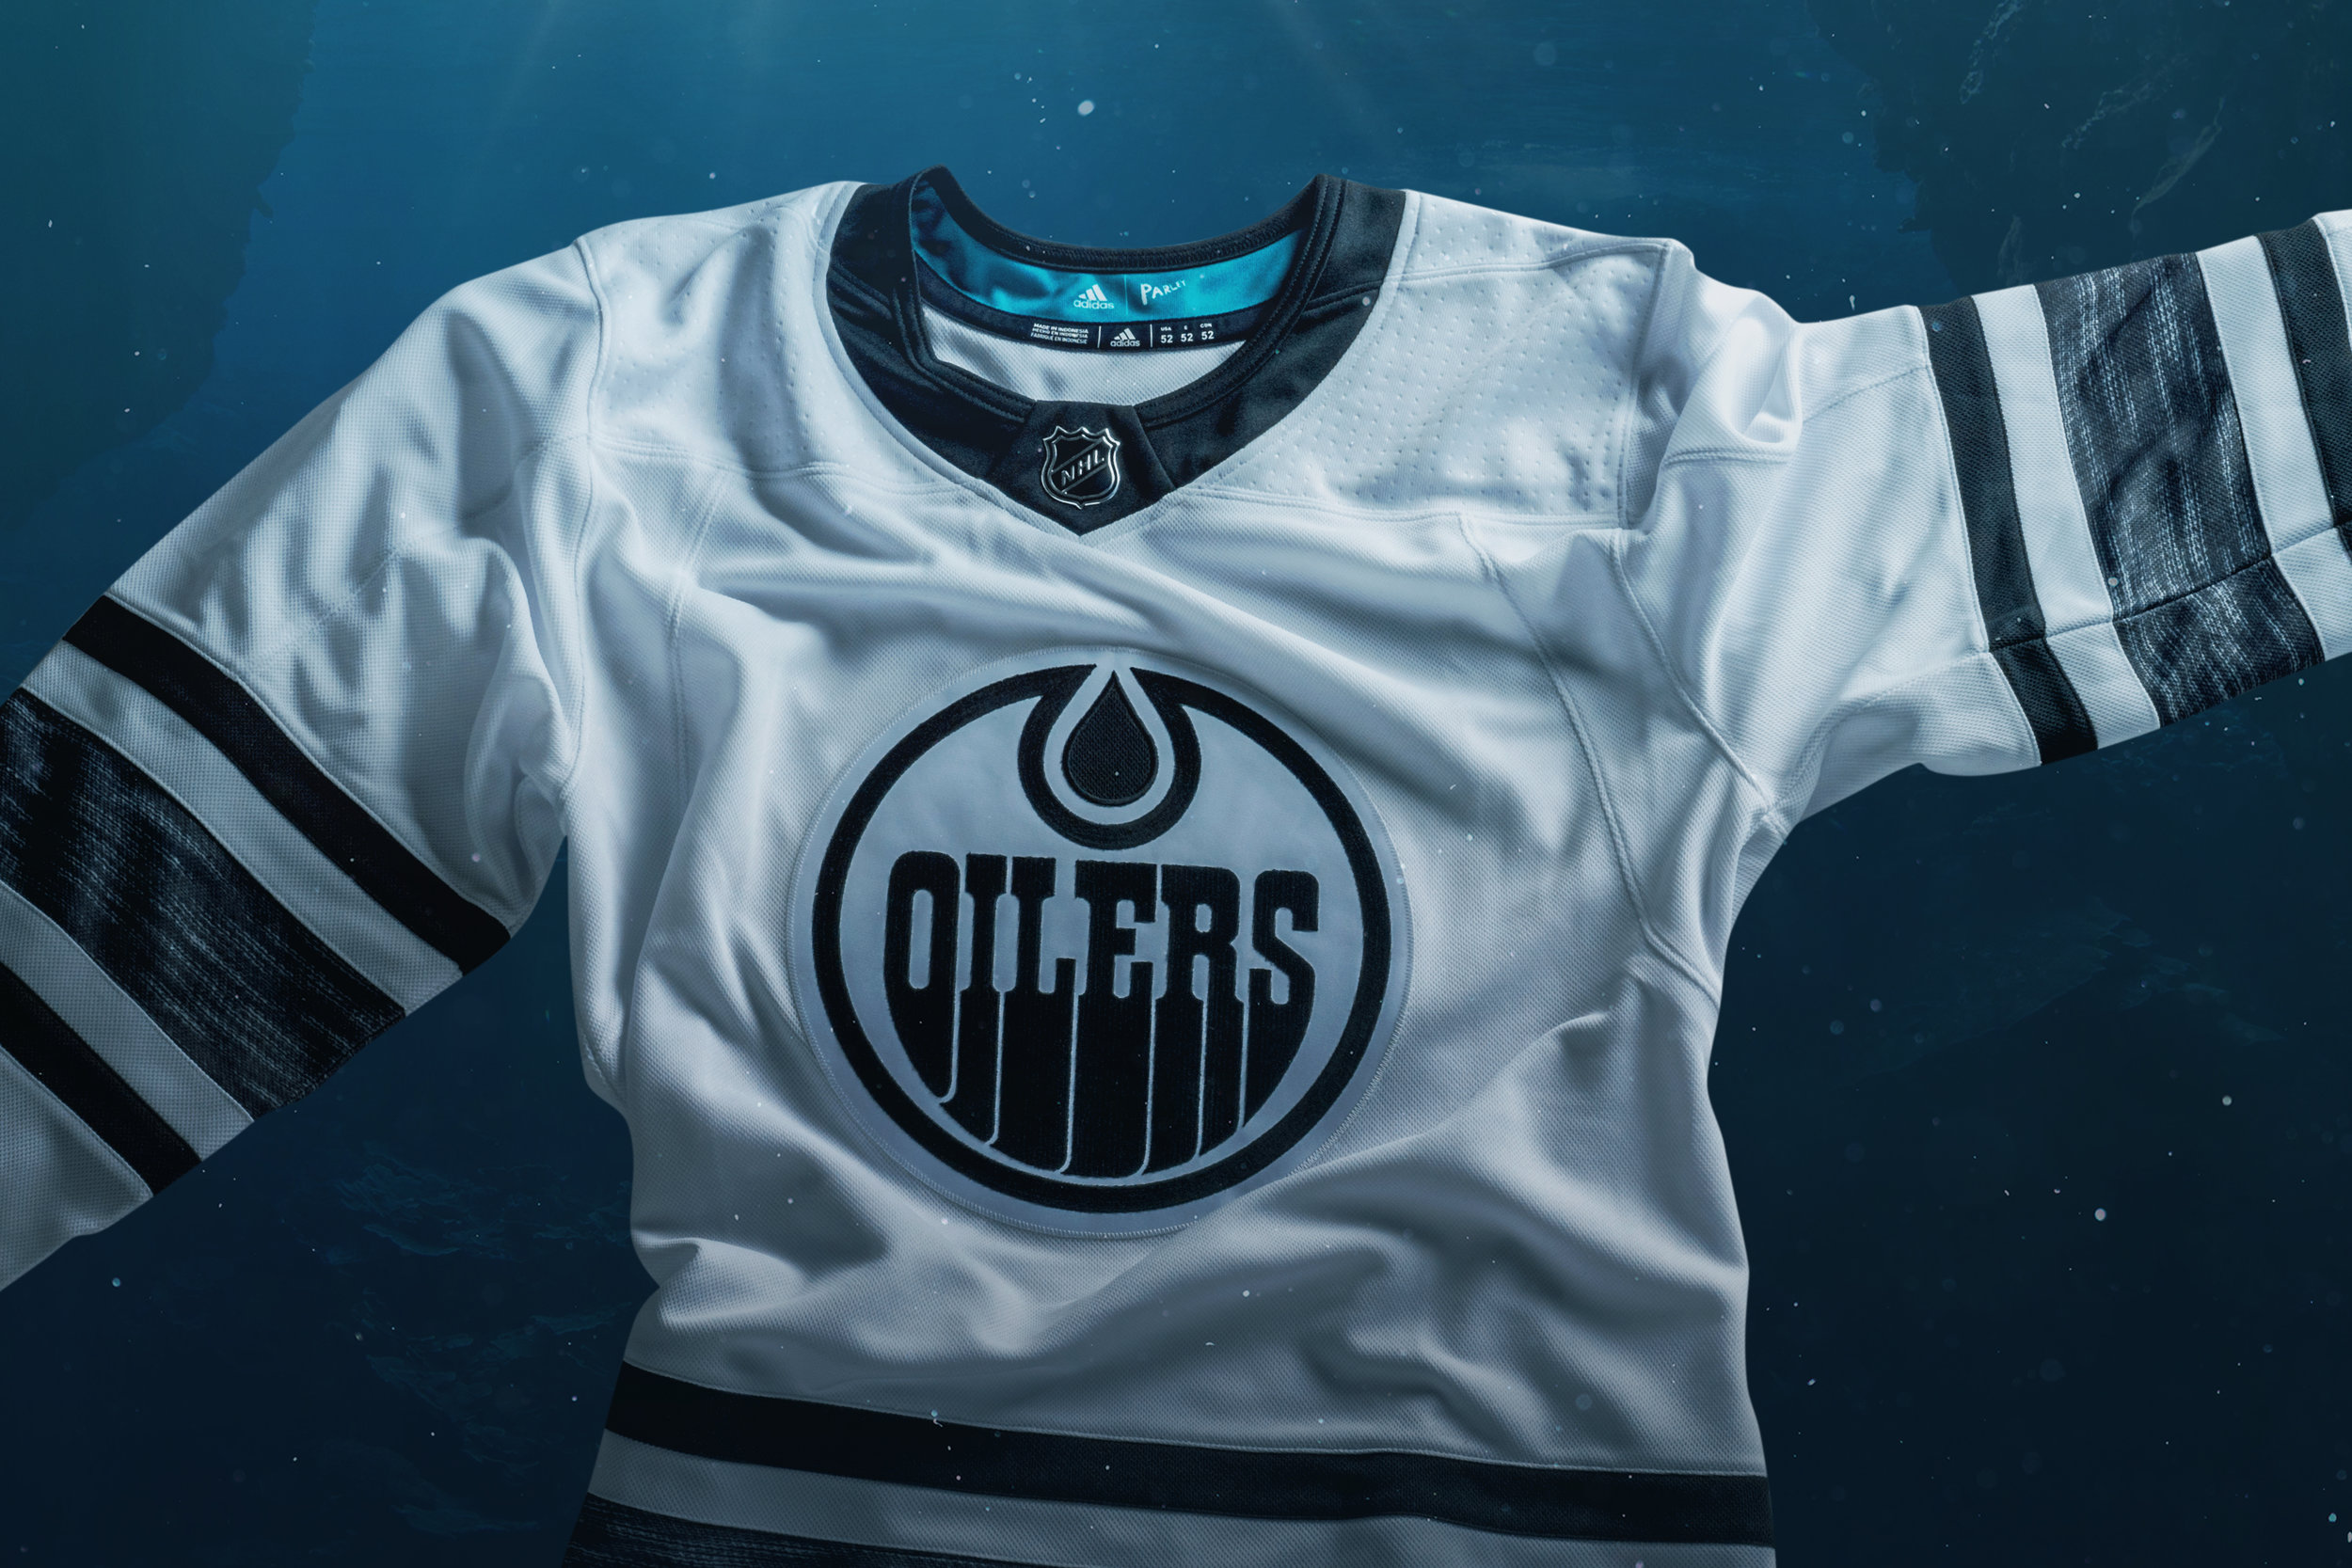  Adidas reveals eco jerseys for 2019 NHL All-Star game